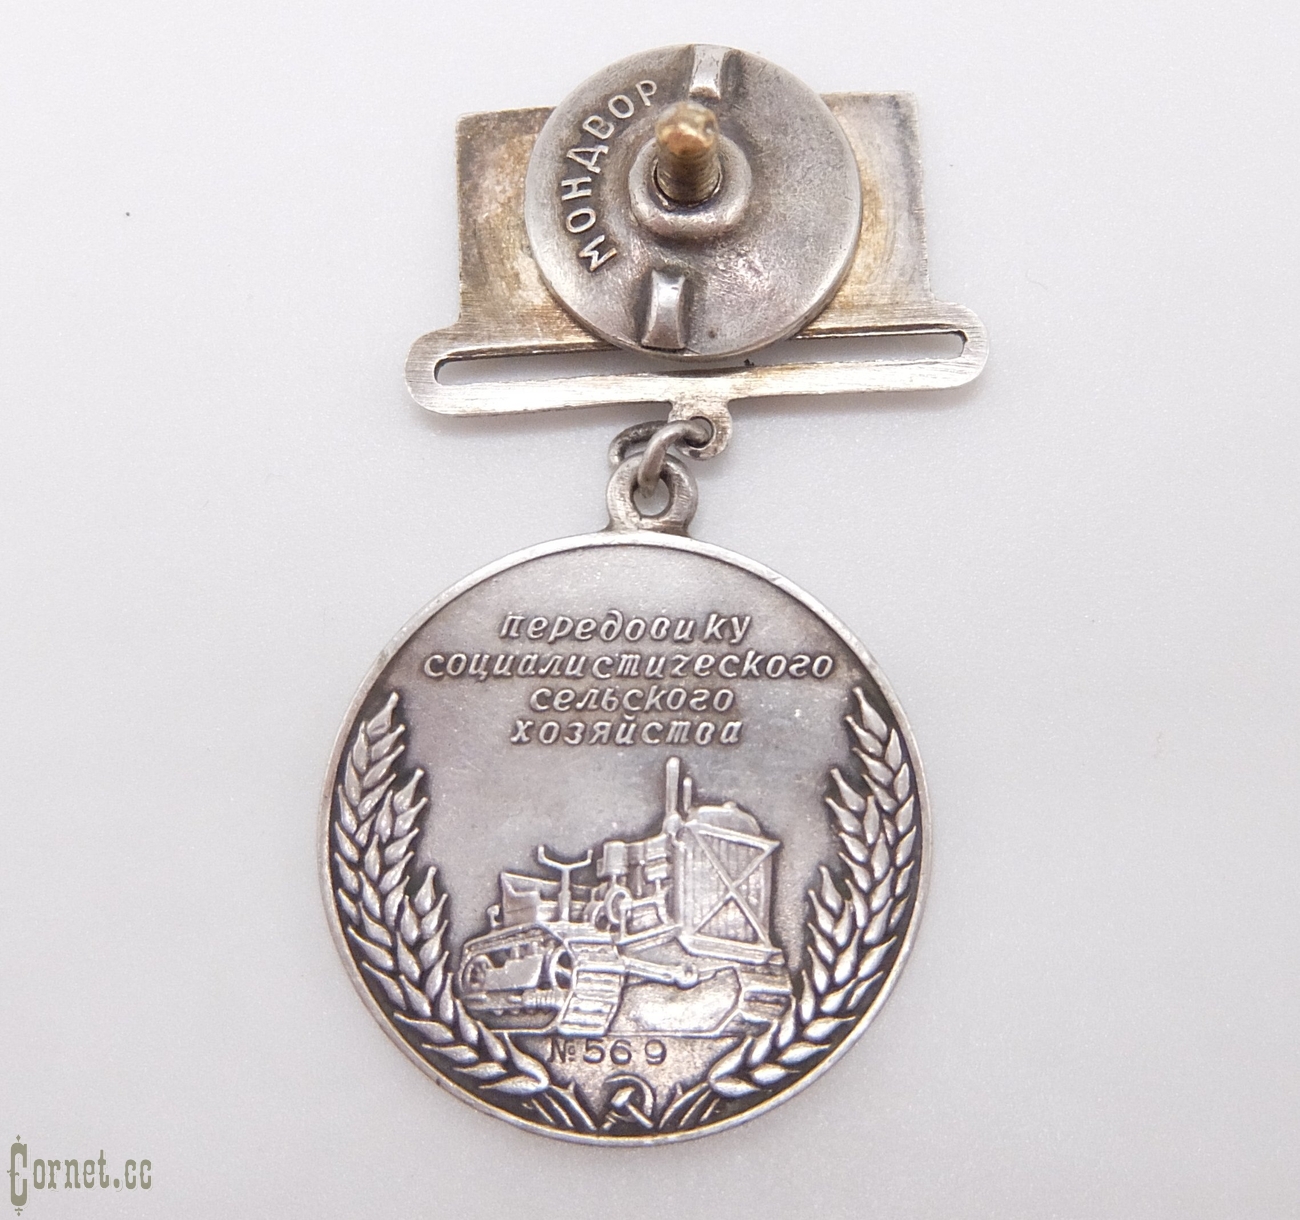 Medal of the All-Union Agricultural Exhibition of 1940